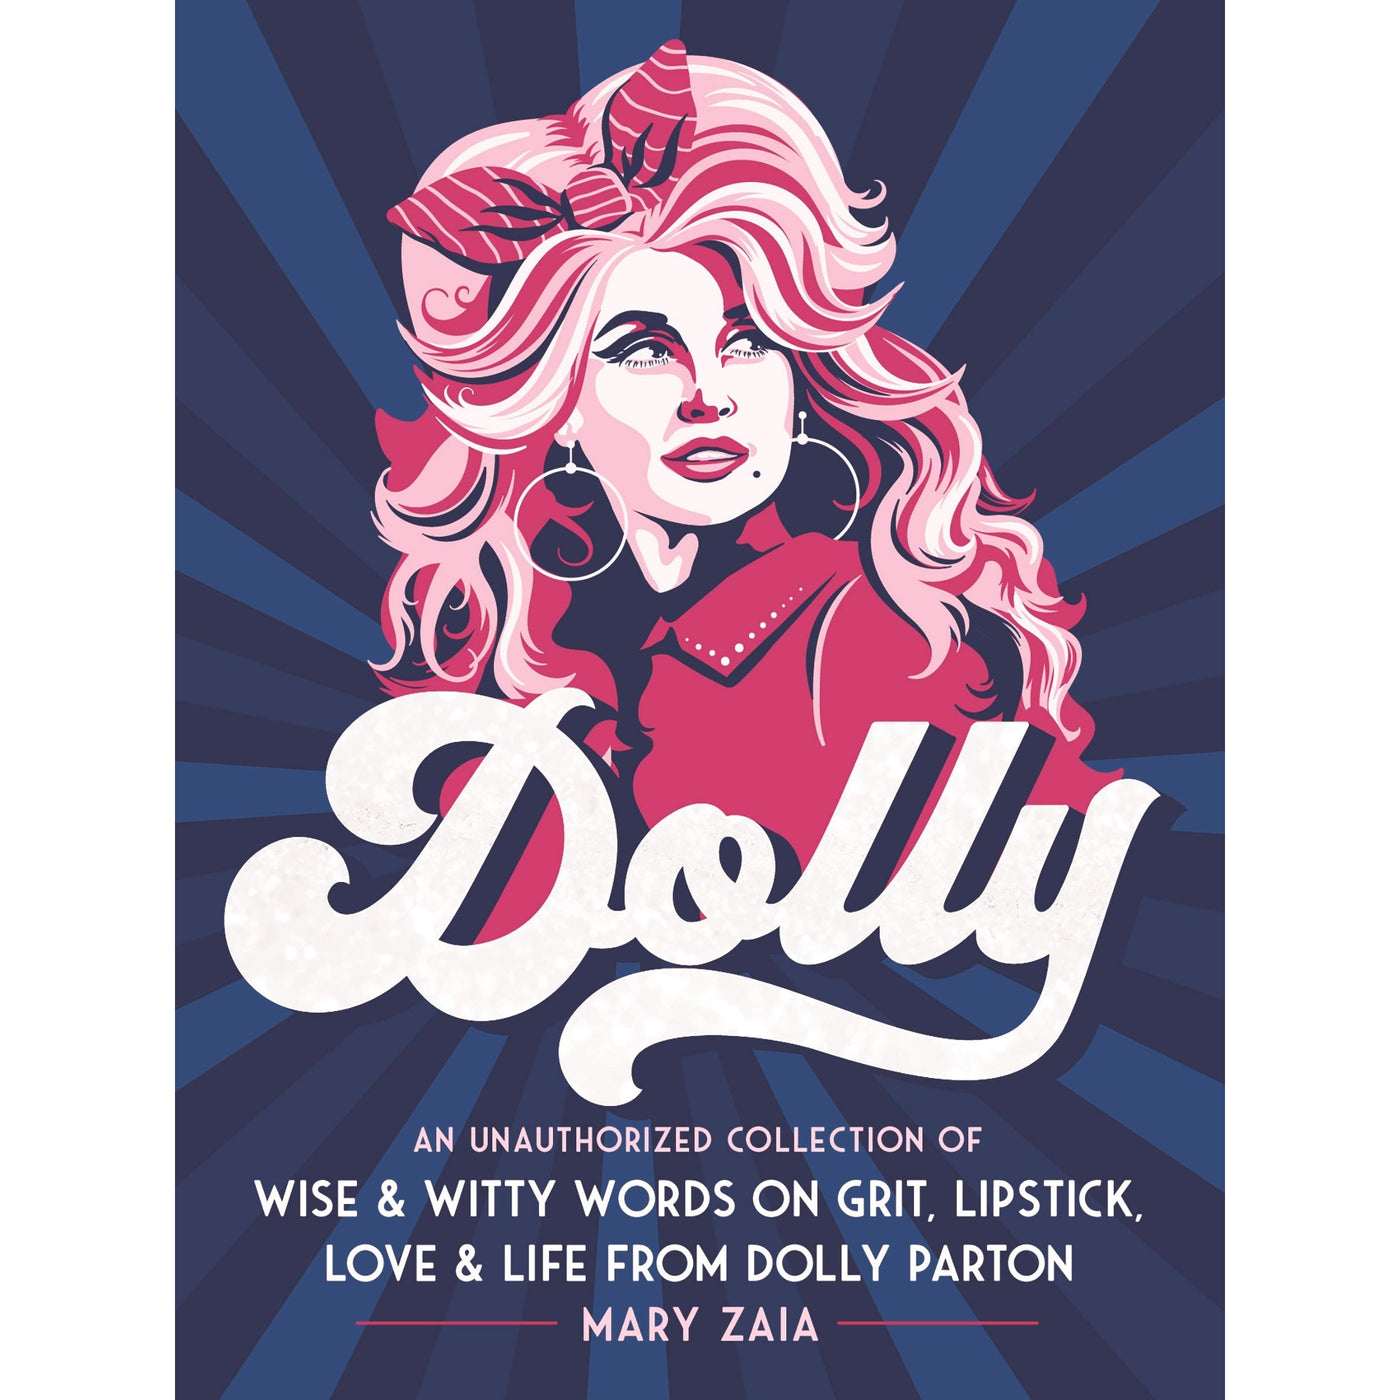 Dolly: An Unauthorized Collection of Wise & Witty Words